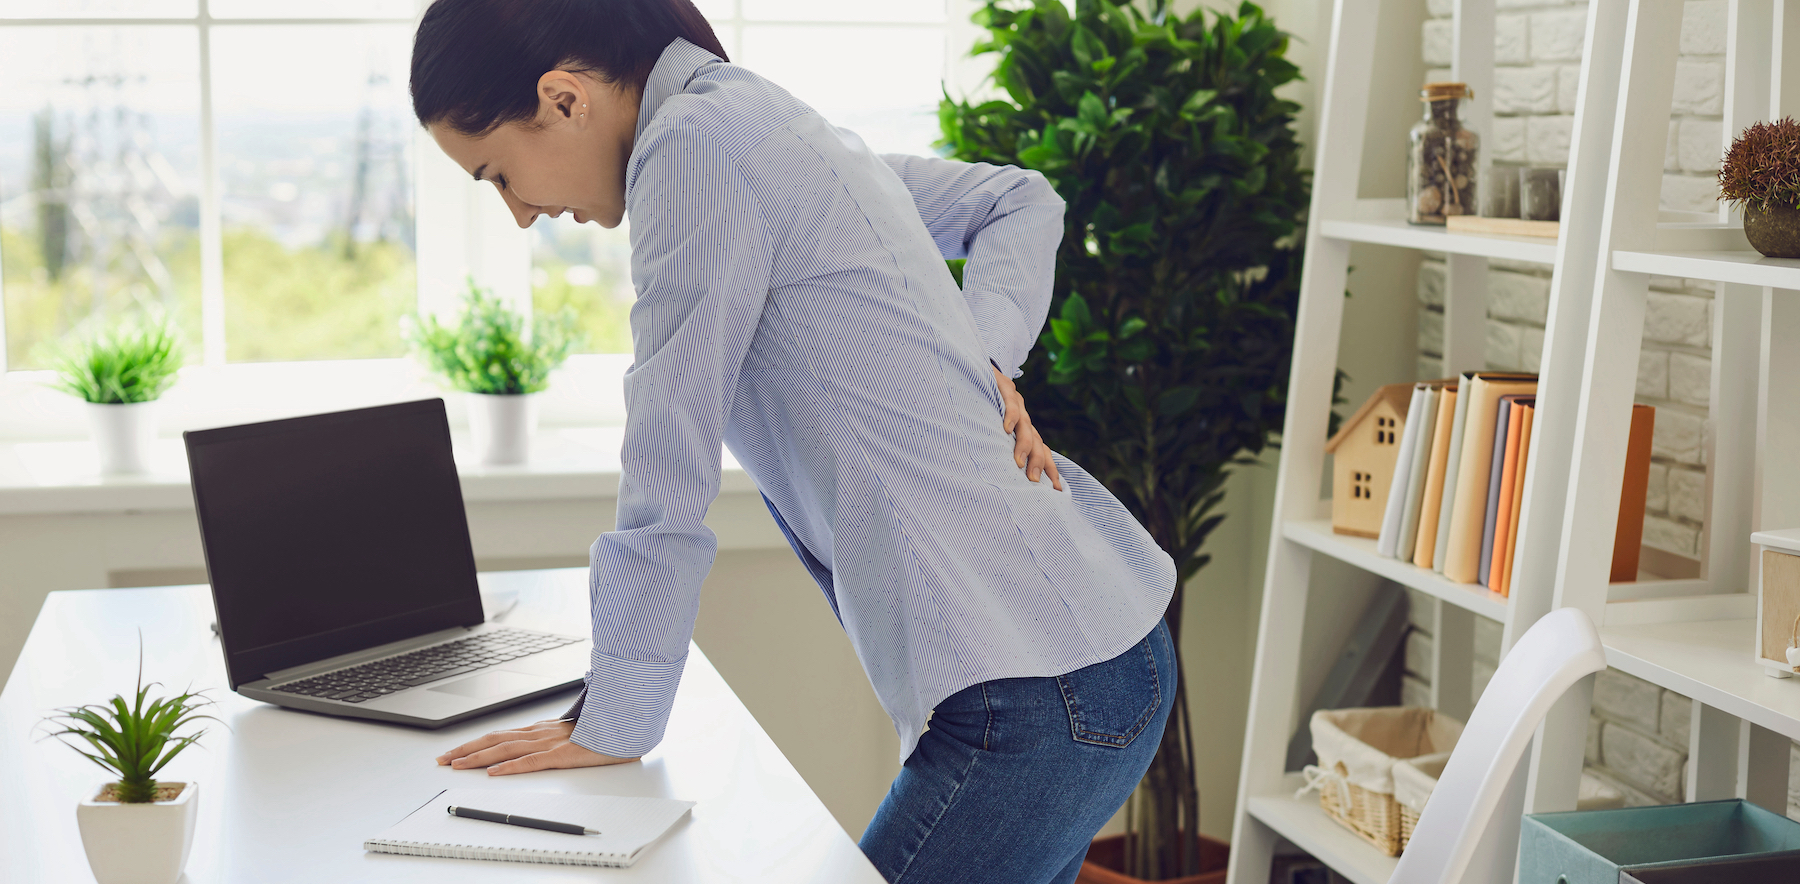 What Causes Sciatica Flare-Up